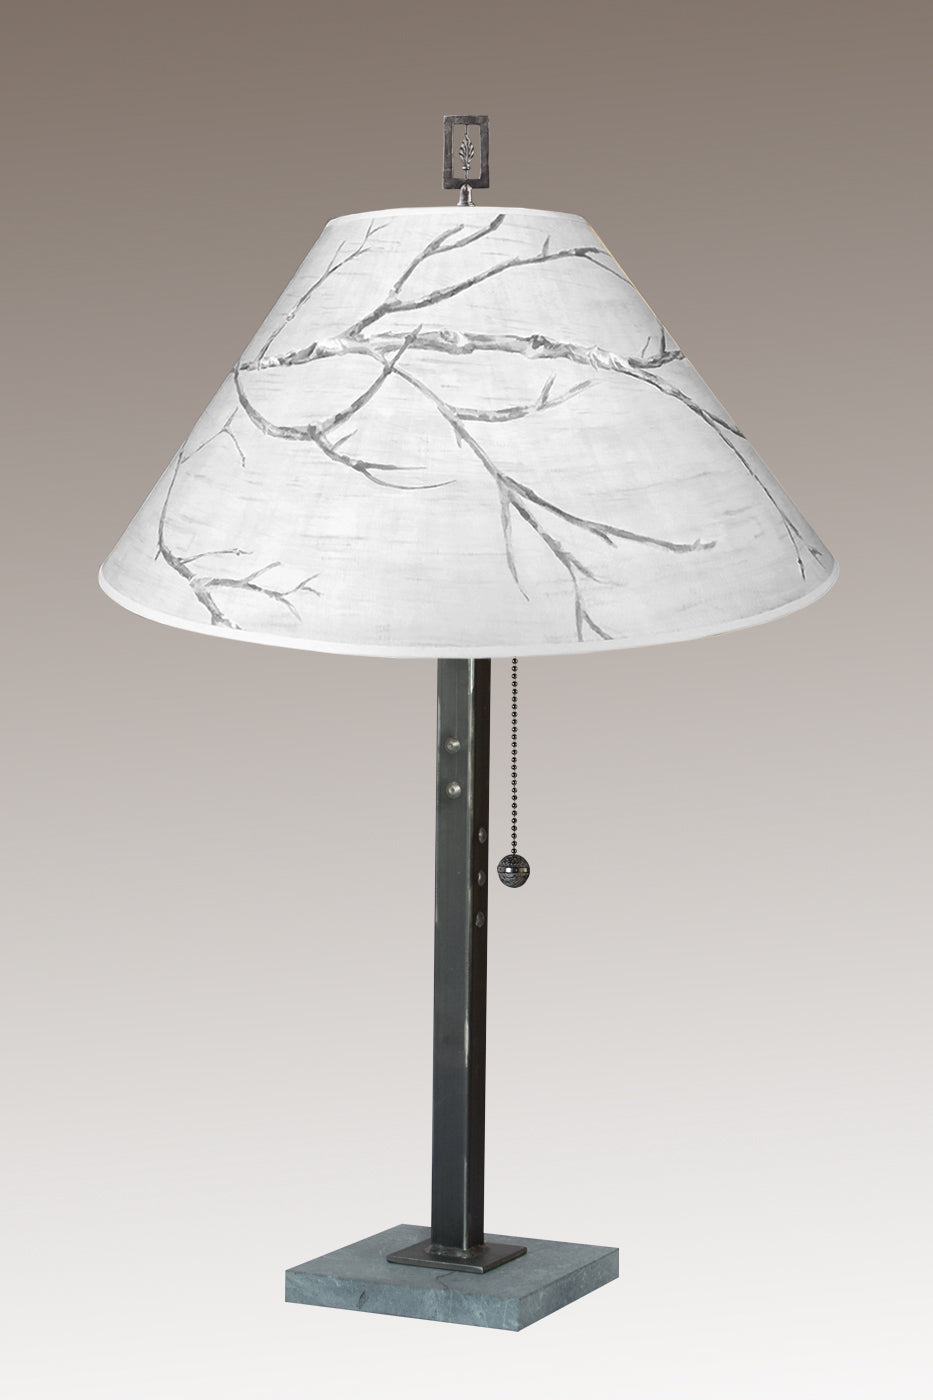 Steel Table Lamp with Large Conical Shade in Sweeping Branch